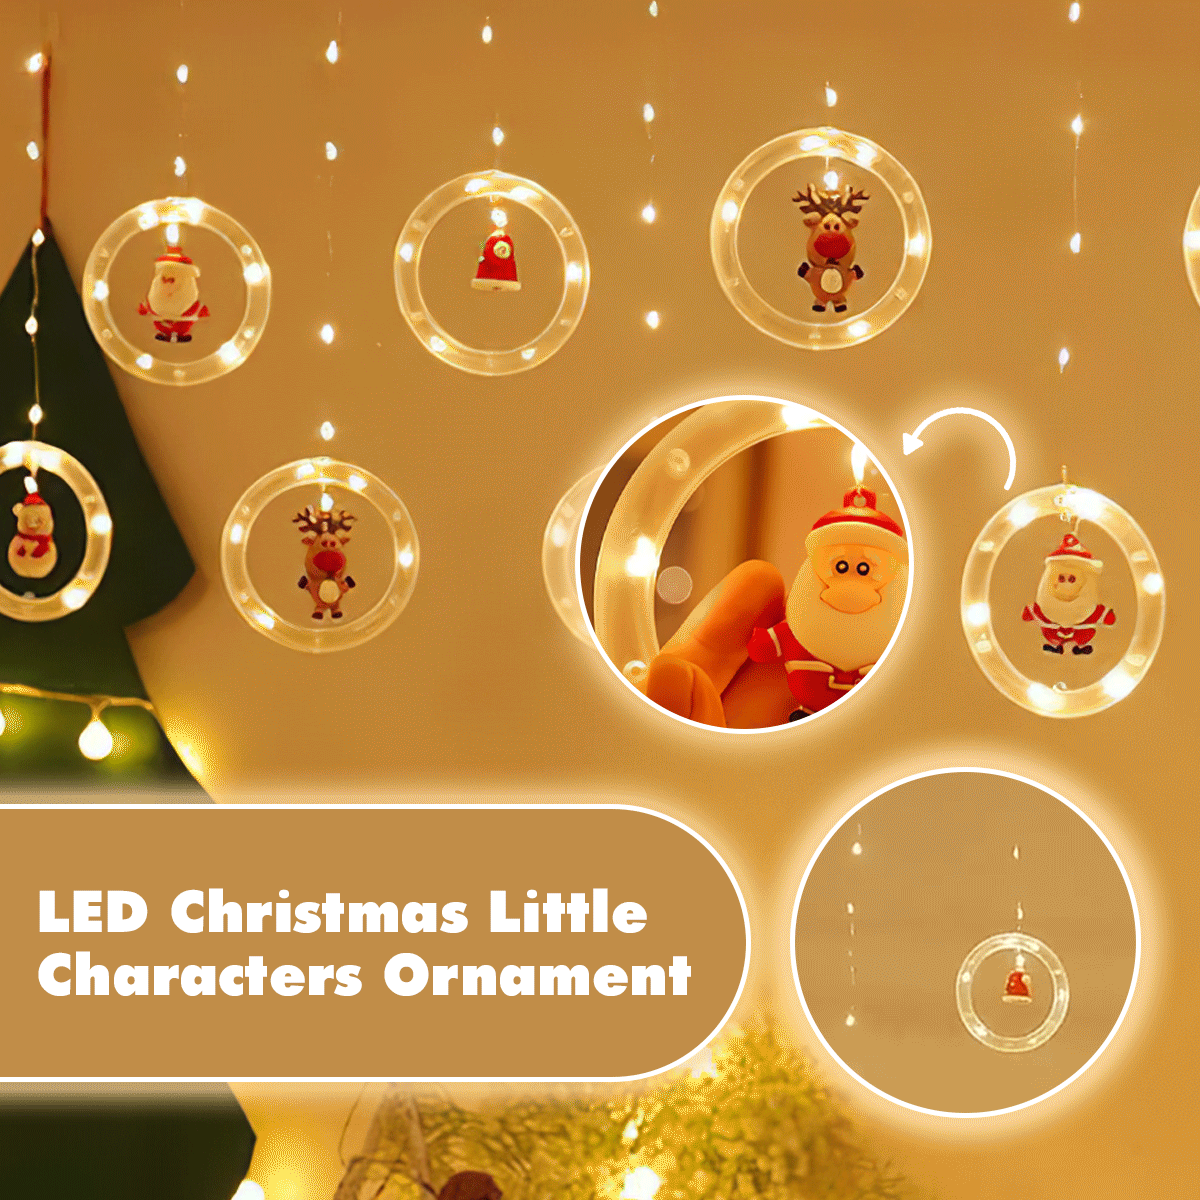 LED Christmas Little Characters Ornament